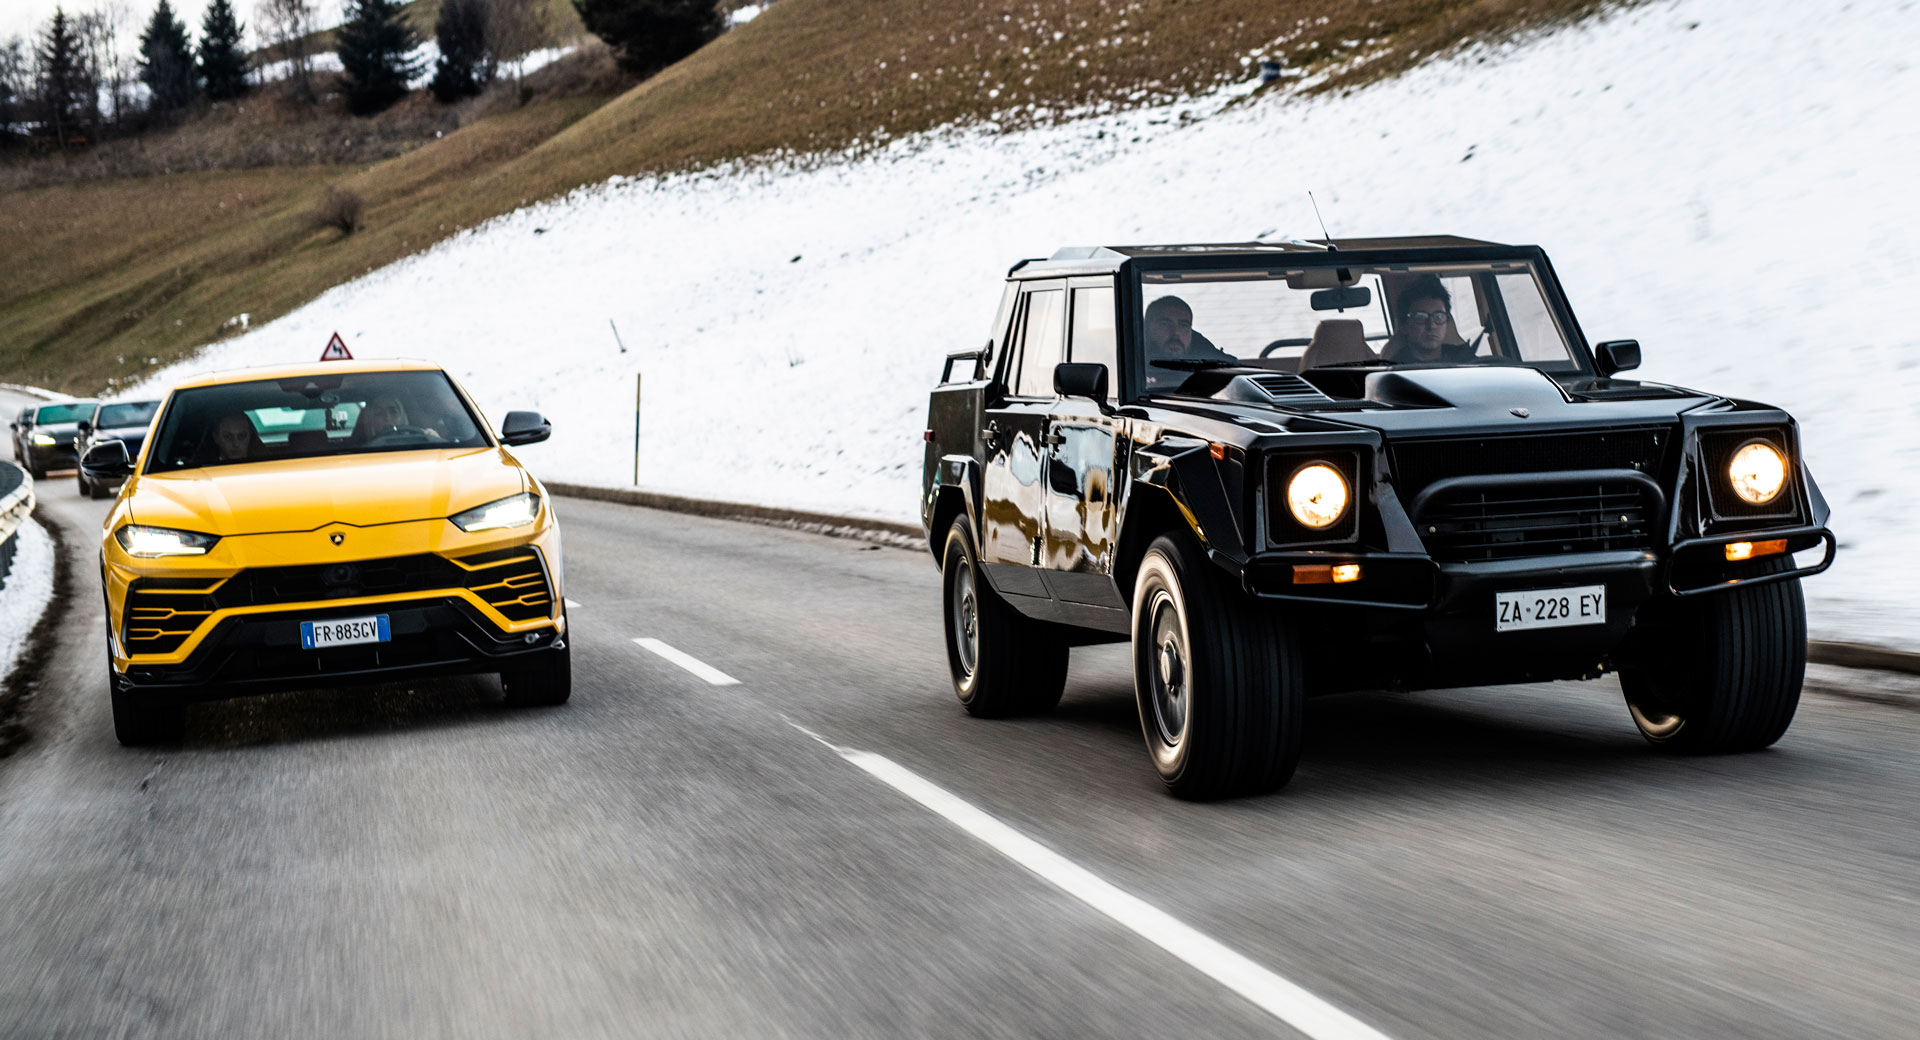 Lamborghini Urus Convoy Embarks On Special Journey, LM002 Leads The Pack |  Carscoops